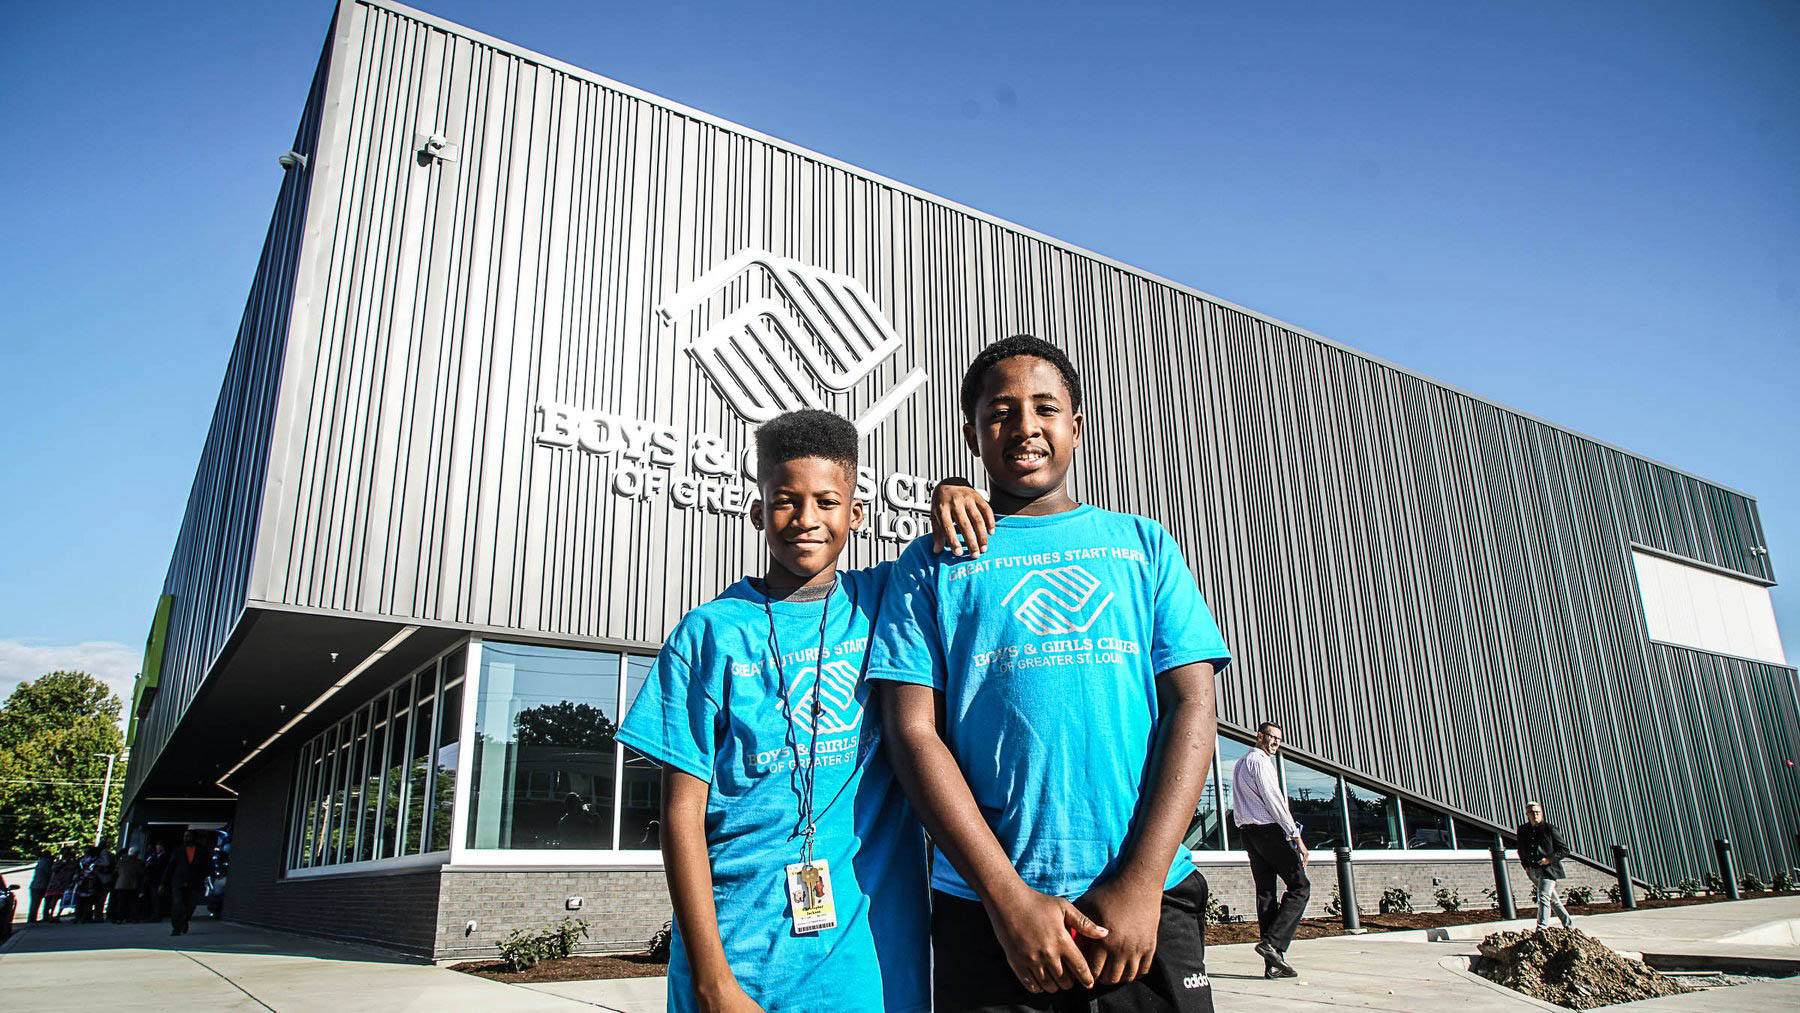 Boys and Girls Club of Greater St. Louis Exterior With Two Boys